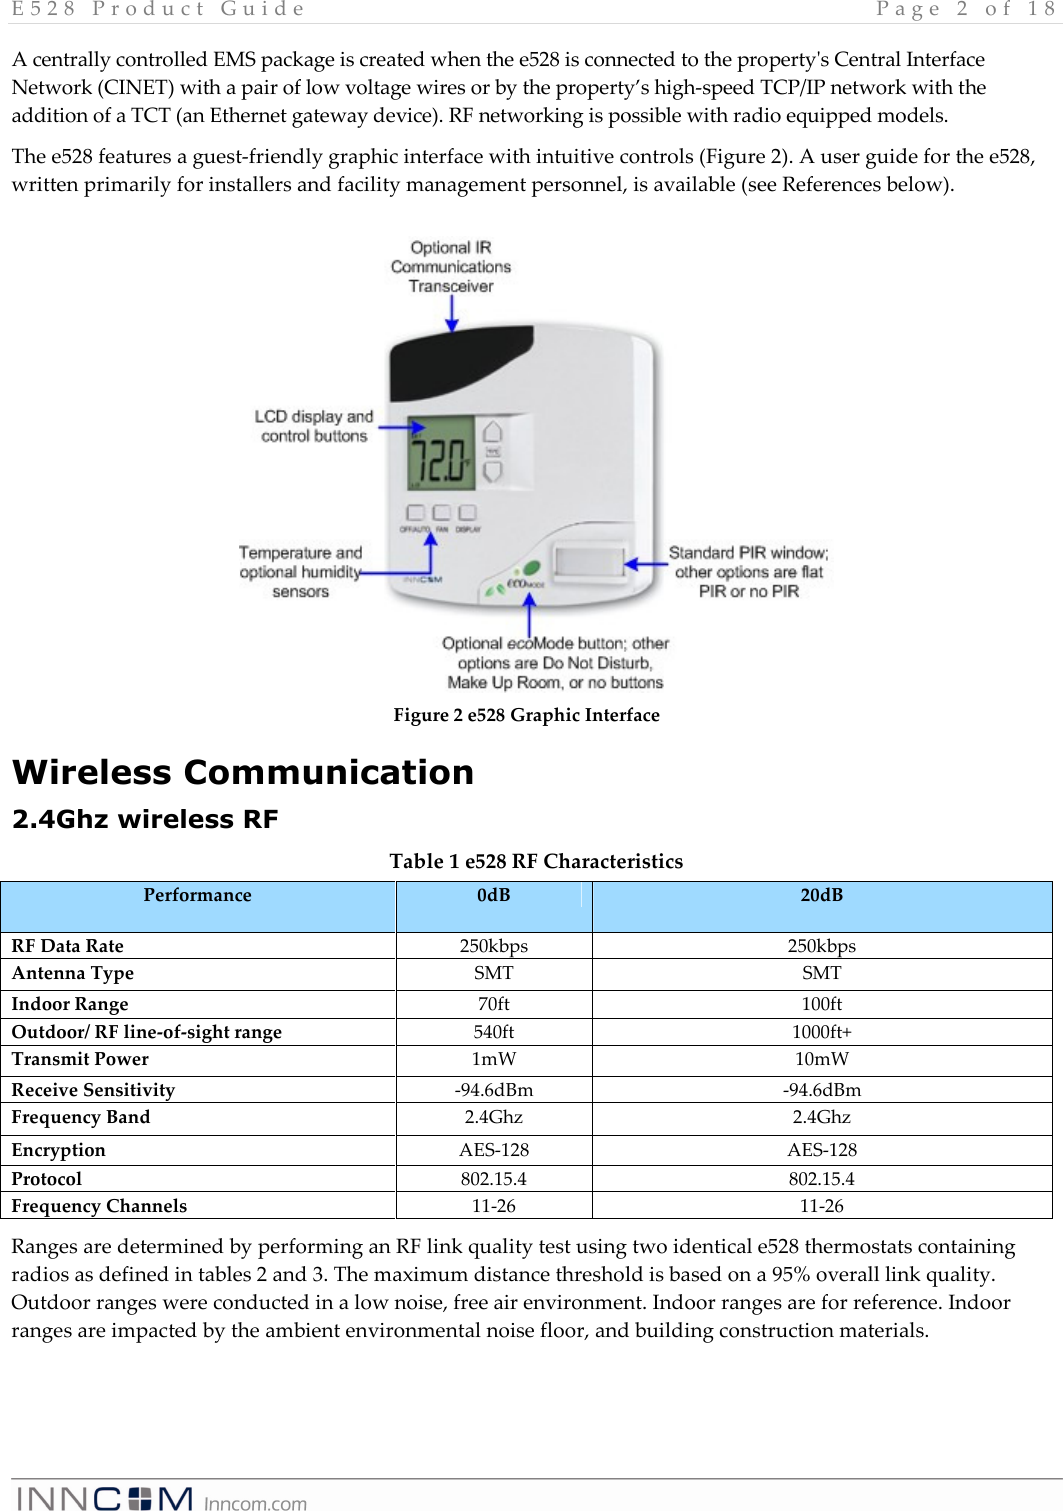 E 5 2 8   P r o d u c t   G u i d e   P a g e   2   o f   1 8    A centrally controlled EMS package is created when the e528 is connected to the property&apos;s Central Interface Network (CINET) with a pair of low voltage wires or by the property’s high-speed TCP/IP network with the addition of a TCT (an Ethernet gateway device). RF networking is possible with radio equipped models. The e528 features a guest-friendly graphic interface with intuitive controls (Figure 2). A user guide for the e528, written primarily for installers and facility management personnel, is available (see References below).              Wireless Communication 2.4Ghz wireless RF Table 1 e528 RF Characteristics Performance  0dB  20dB RF Data Rate  250kbps  250kbps Antenna Type  SMT  SMT Indoor Range   70ft  100ft Outdoor/ RF line-of-sight range  540ft  1000ft+ Transmit Power  1mW   10mW  Receive Sensitivity  -94.6dBm  -94.6dBm Frequency Band  2.4Ghz  2.4Ghz Encryption  AES-128  AES-128 Protocol  802.15.4  802.15.4 Frequency Channels  11-26  11-26 Ranges are determined by performing an RF link quality test using two identical e528 thermostats containing radios as defined in tables 2 and 3. The maximum distance threshold is based on a 95% overall link quality. Outdoor ranges were conducted in a low noise, free air environment. Indoor ranges are for reference. Indoor ranges are impacted by the ambient environmental noise floor, and building construction materials.  Figure 2 e528 Graphic Interface 